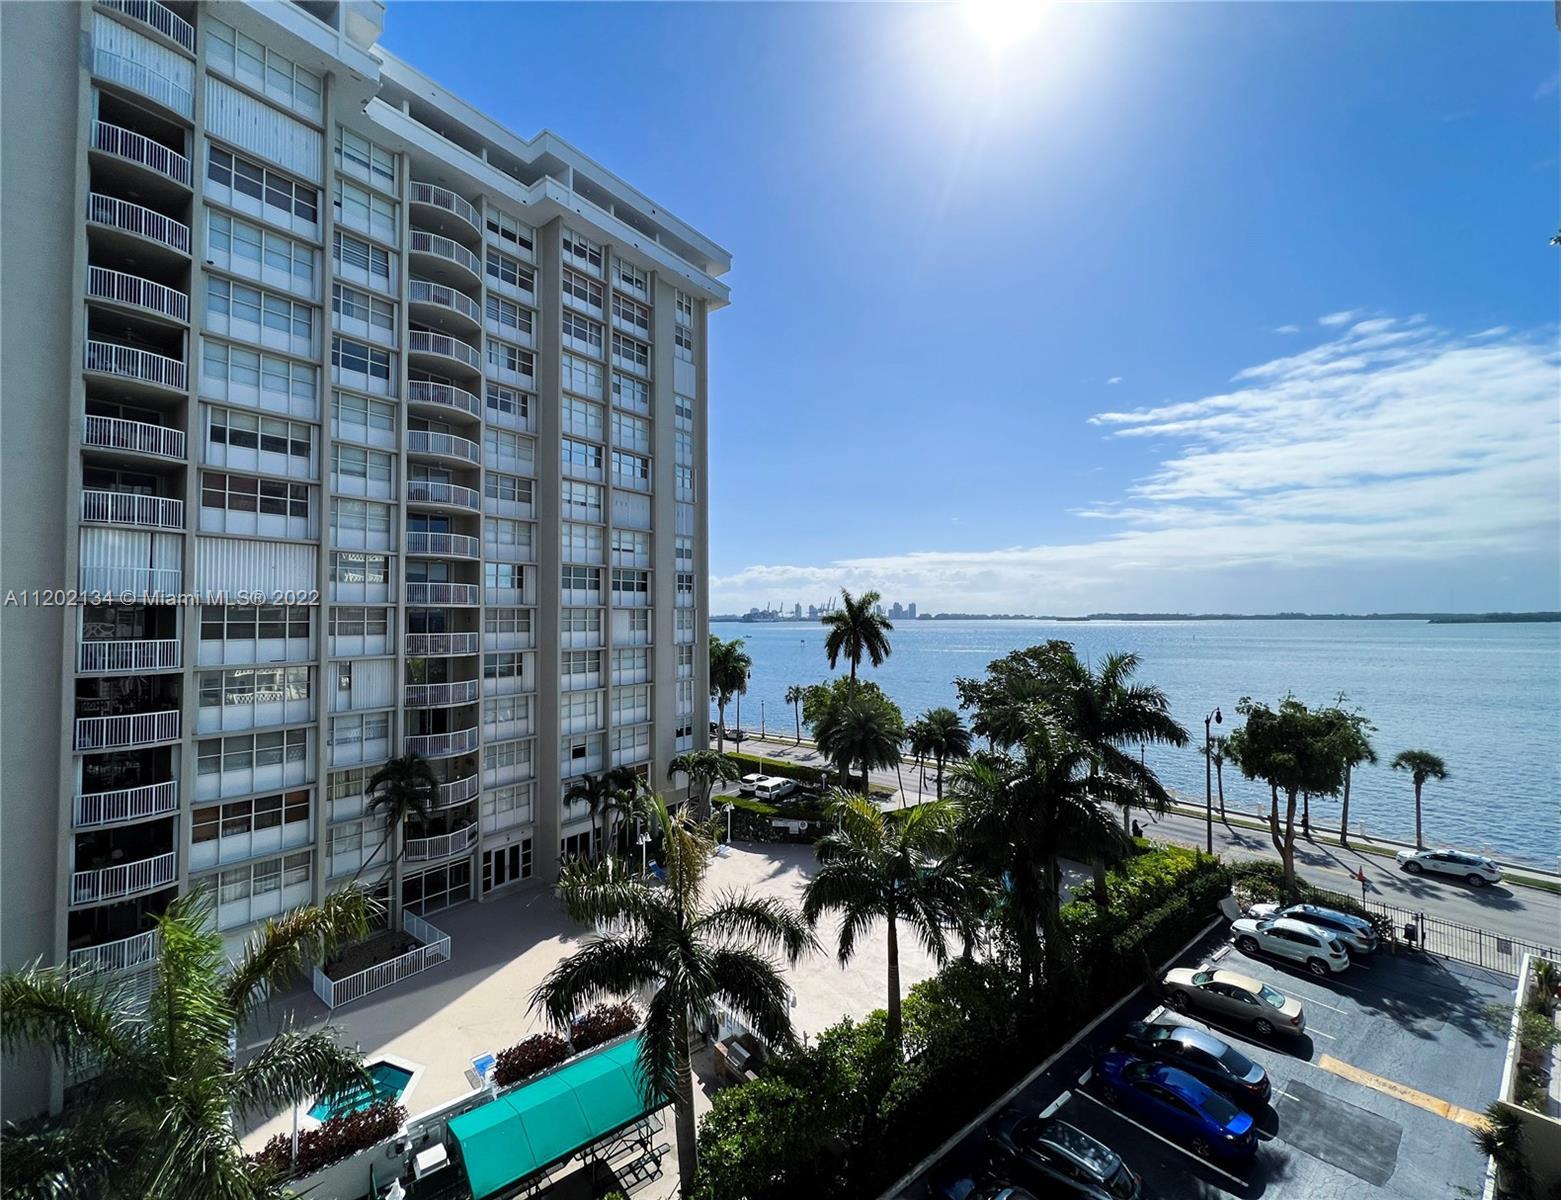 Spacious waterfront studio in excellent condition located in the heart of Brickell, featuring an ope